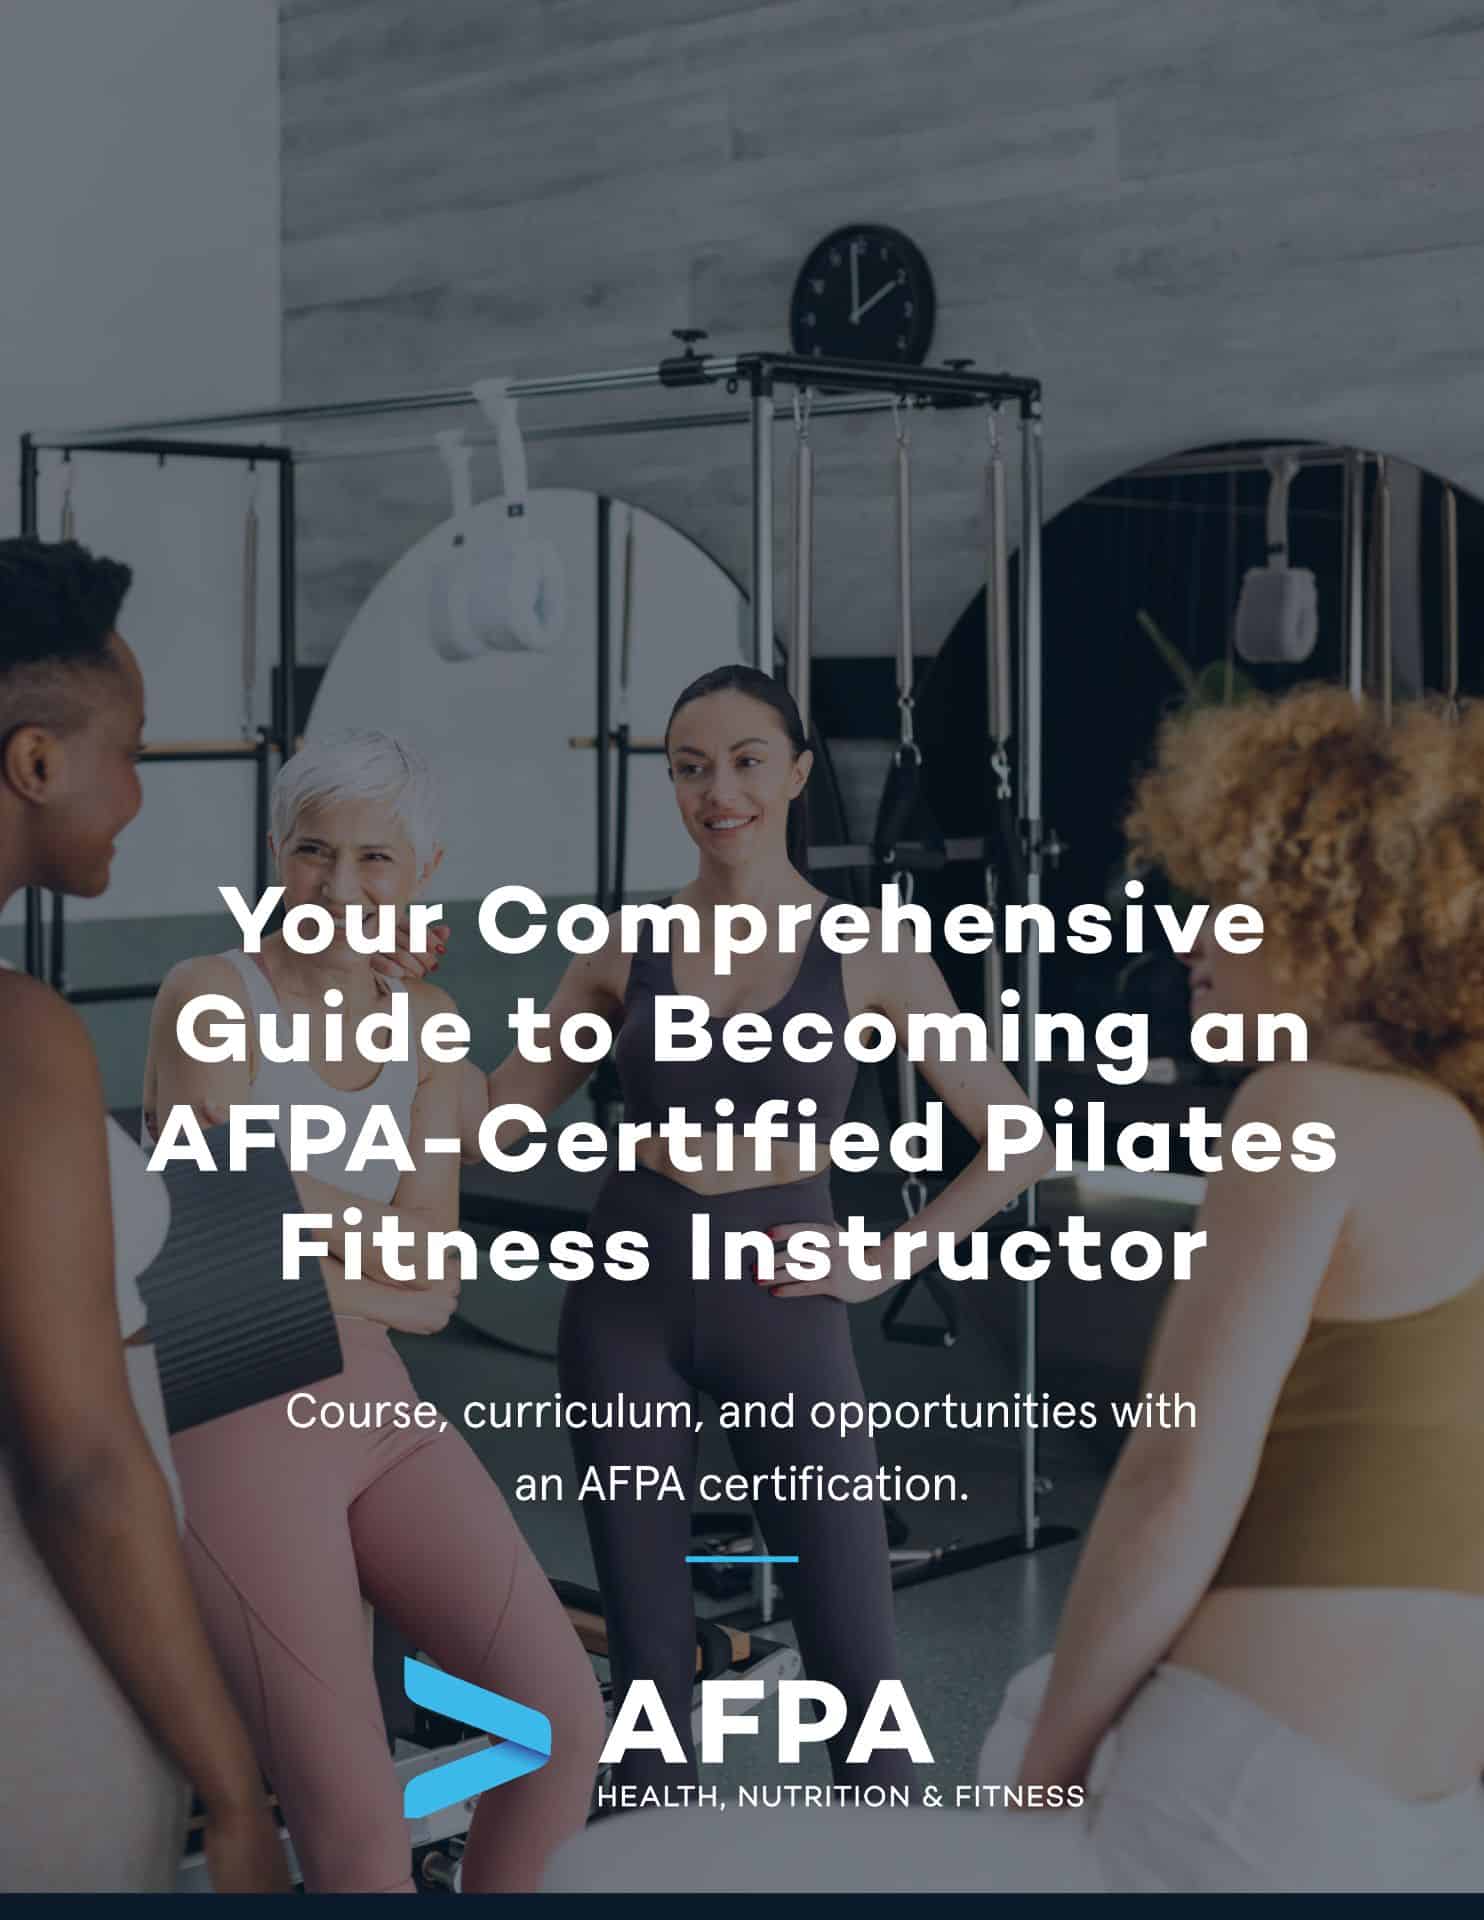 Your Guide to Becoming an AFPA-Certified Pilates Fitness Instructor